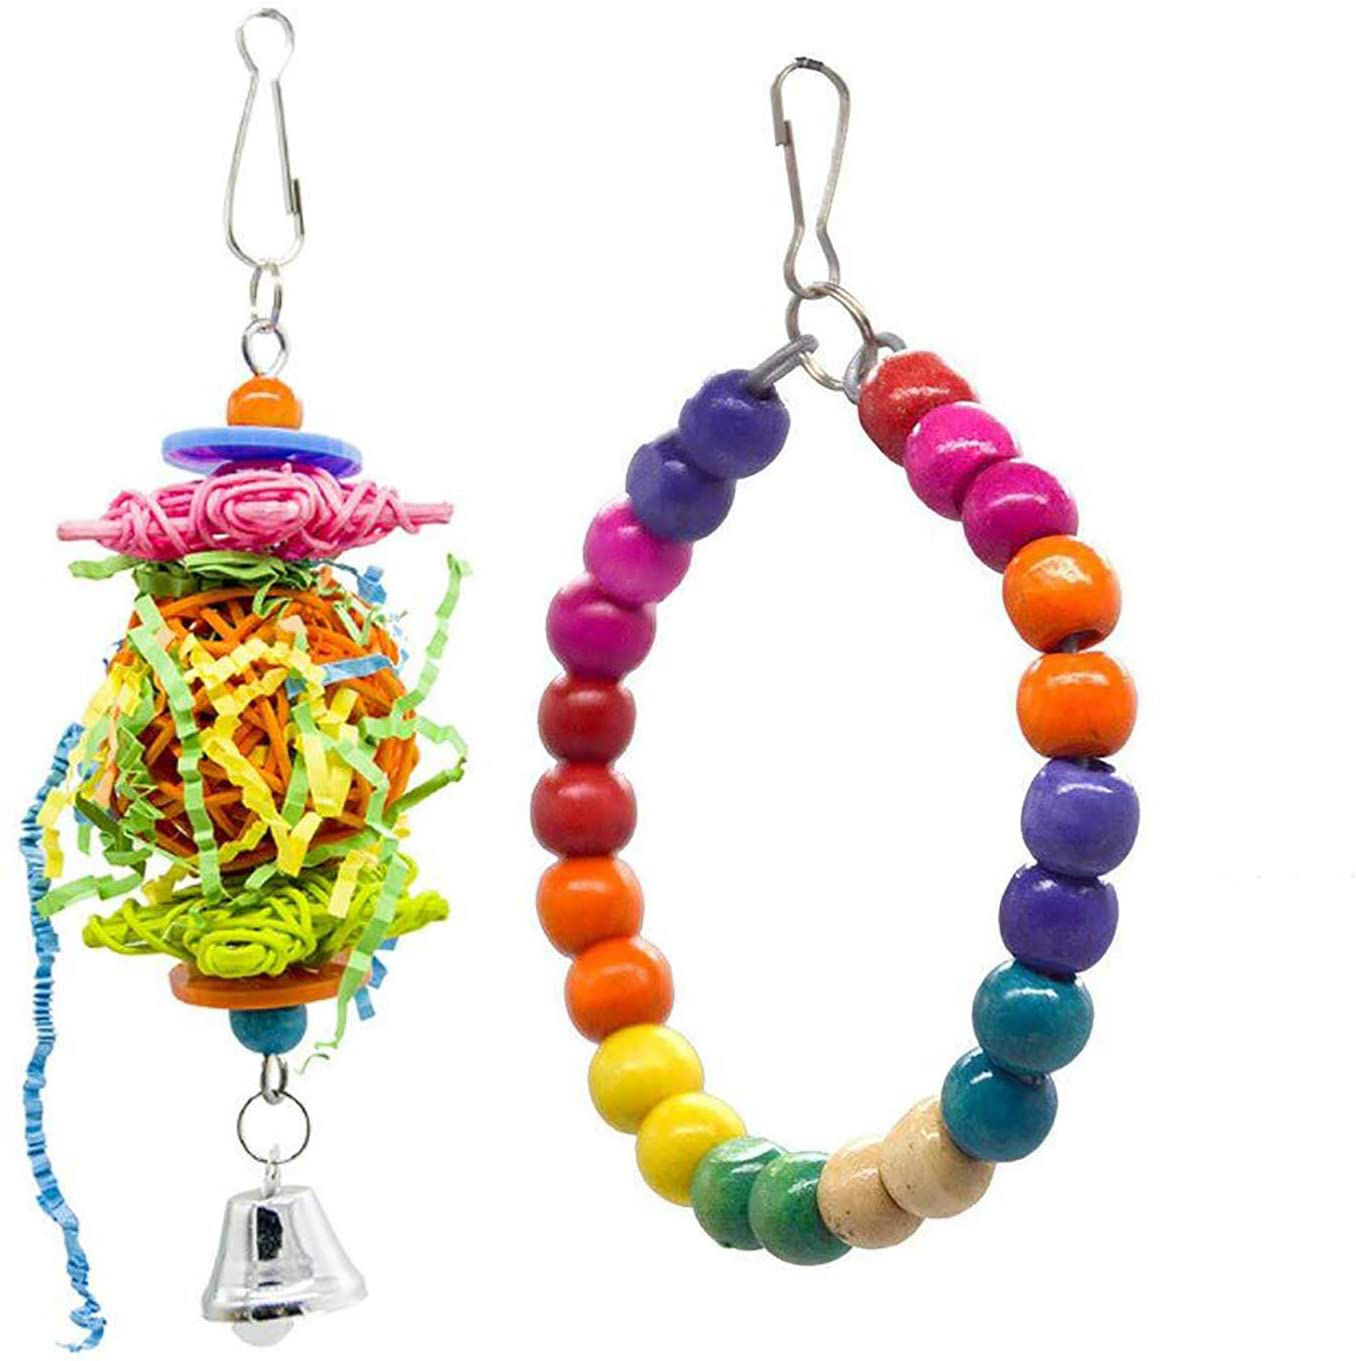 Ebaokuup 7 Packs Bird Swing Chewing Toys- Parrot Hammock Bell Toys Suitable for Small Parakeets, Cockatiels, Conures, Finches,Budgie,Macaws, Parrots, Love Birds Animals & Pet Supplies > Pet Supplies > Bird Supplies > Bird Cage Accessories EBaokuup   